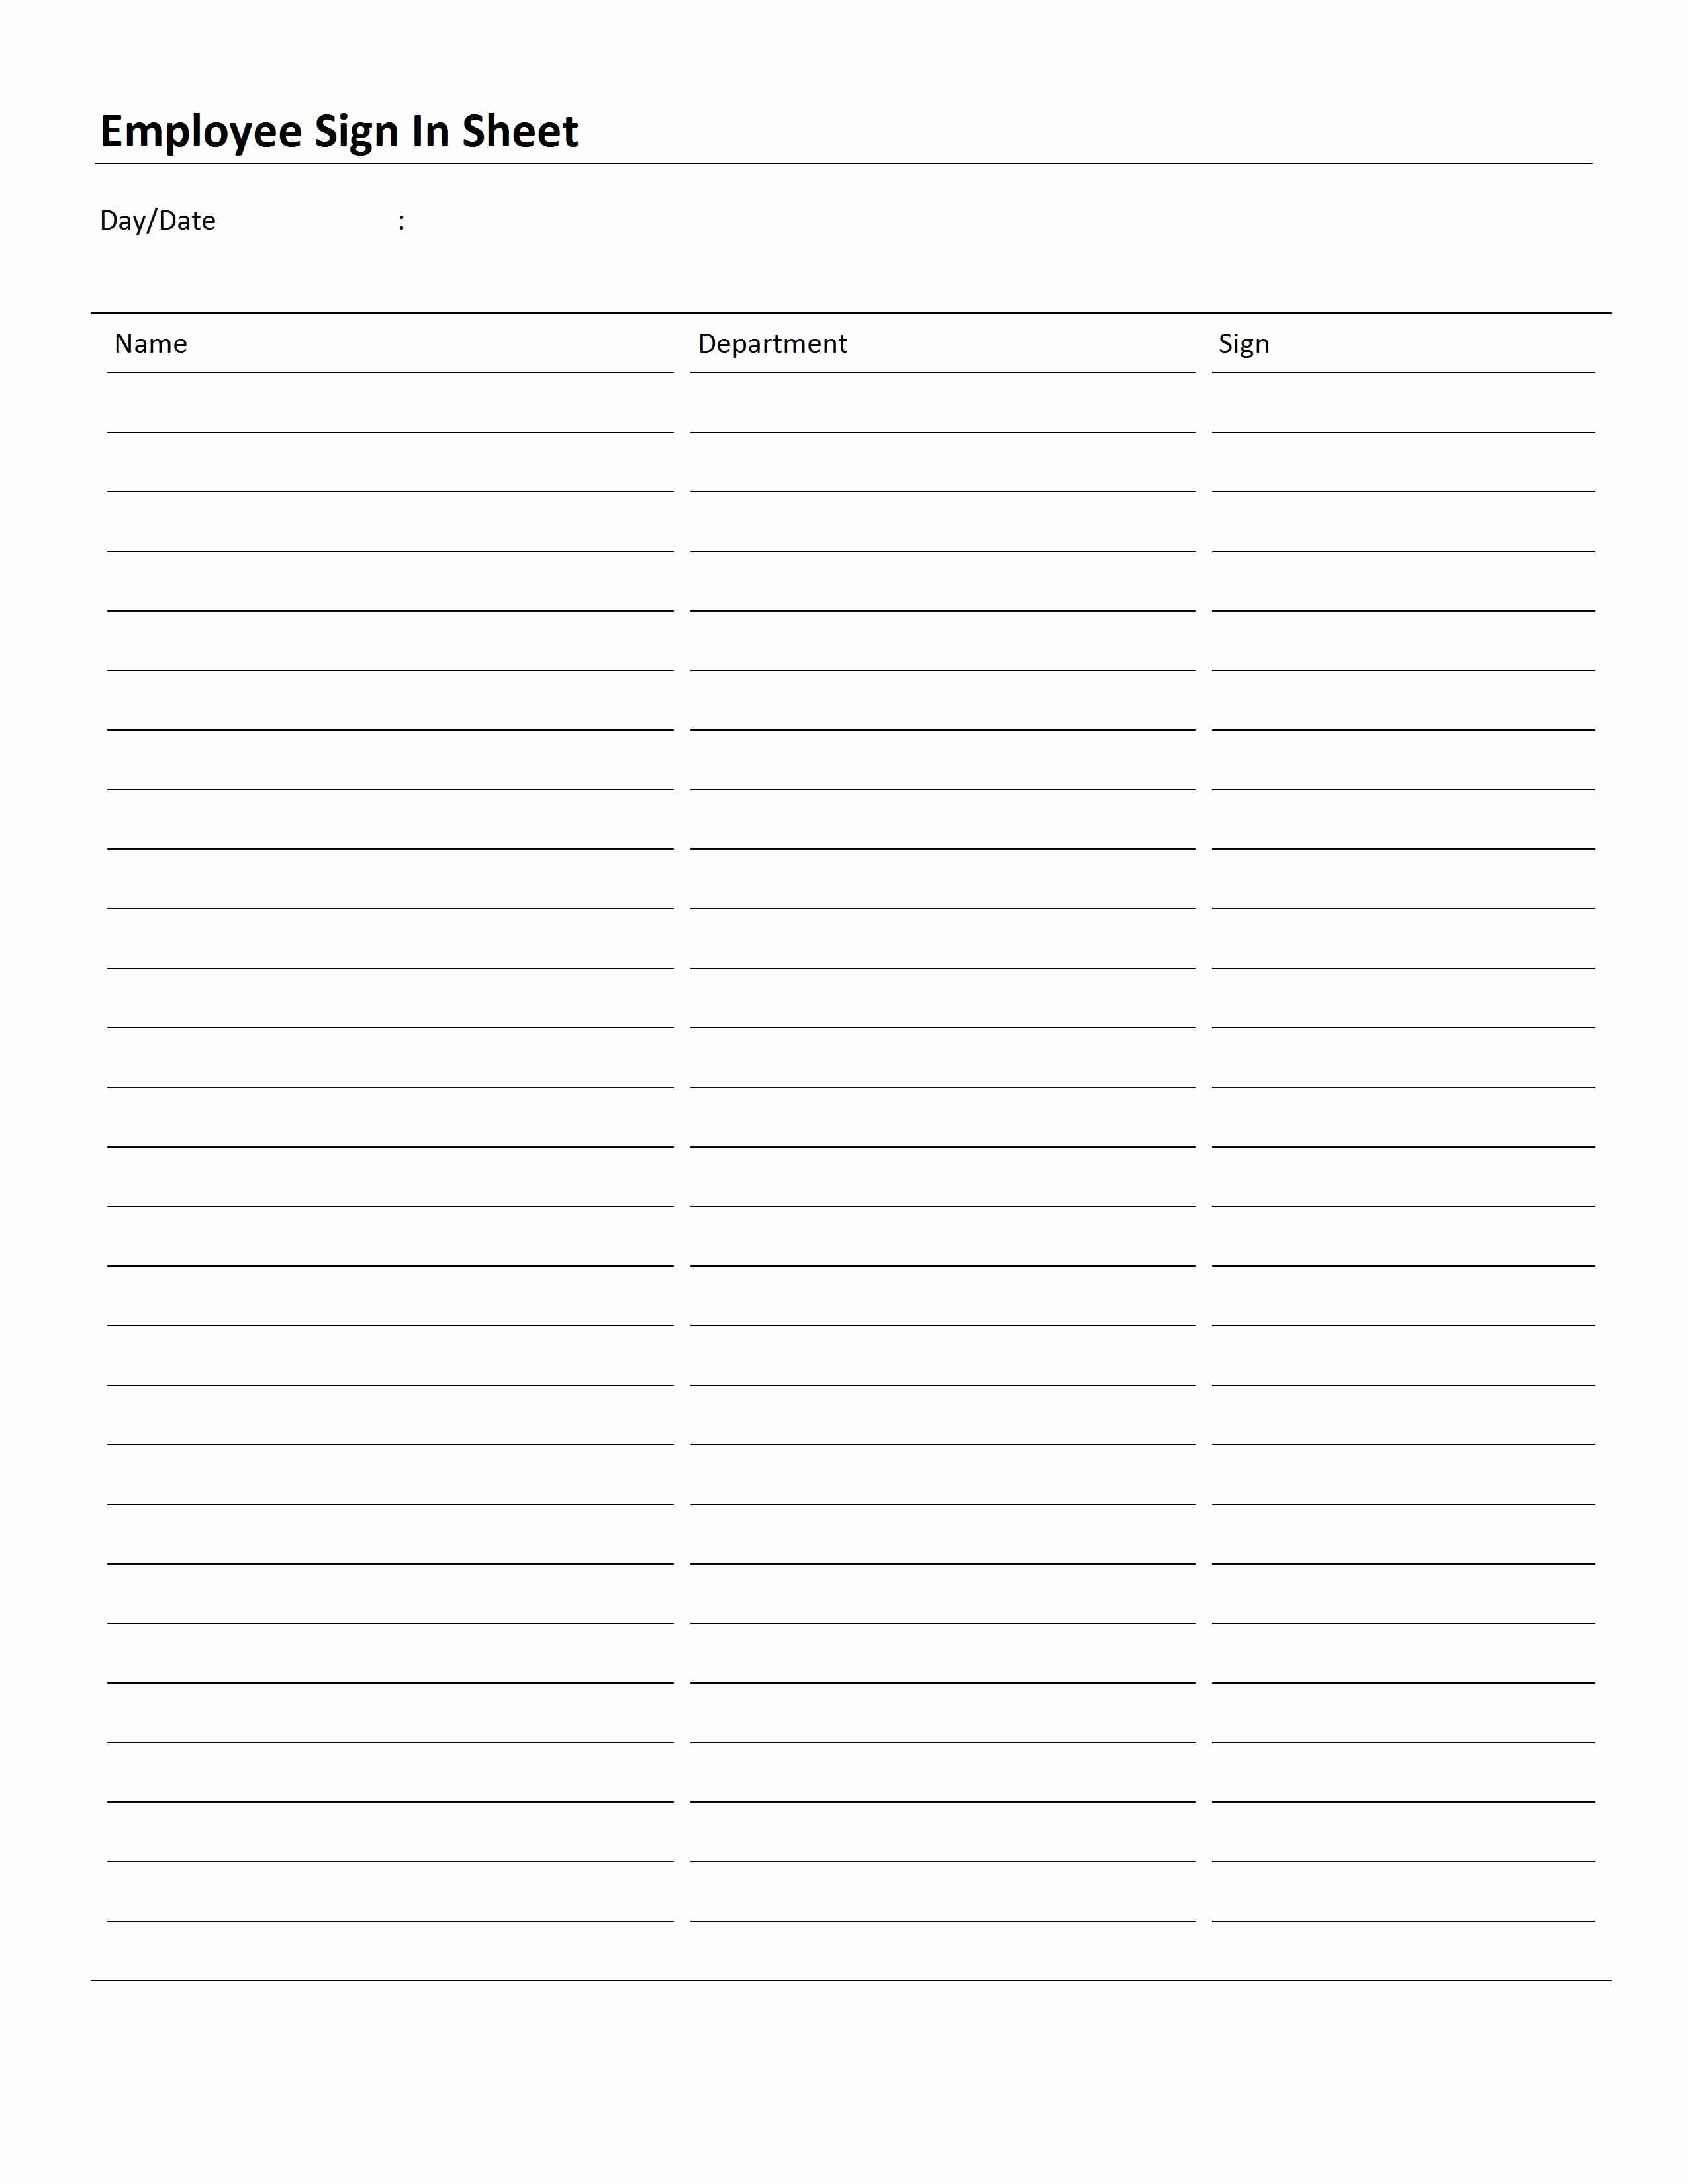 Employee Sign In Sheet Template Unique Employee Sign In Sheet